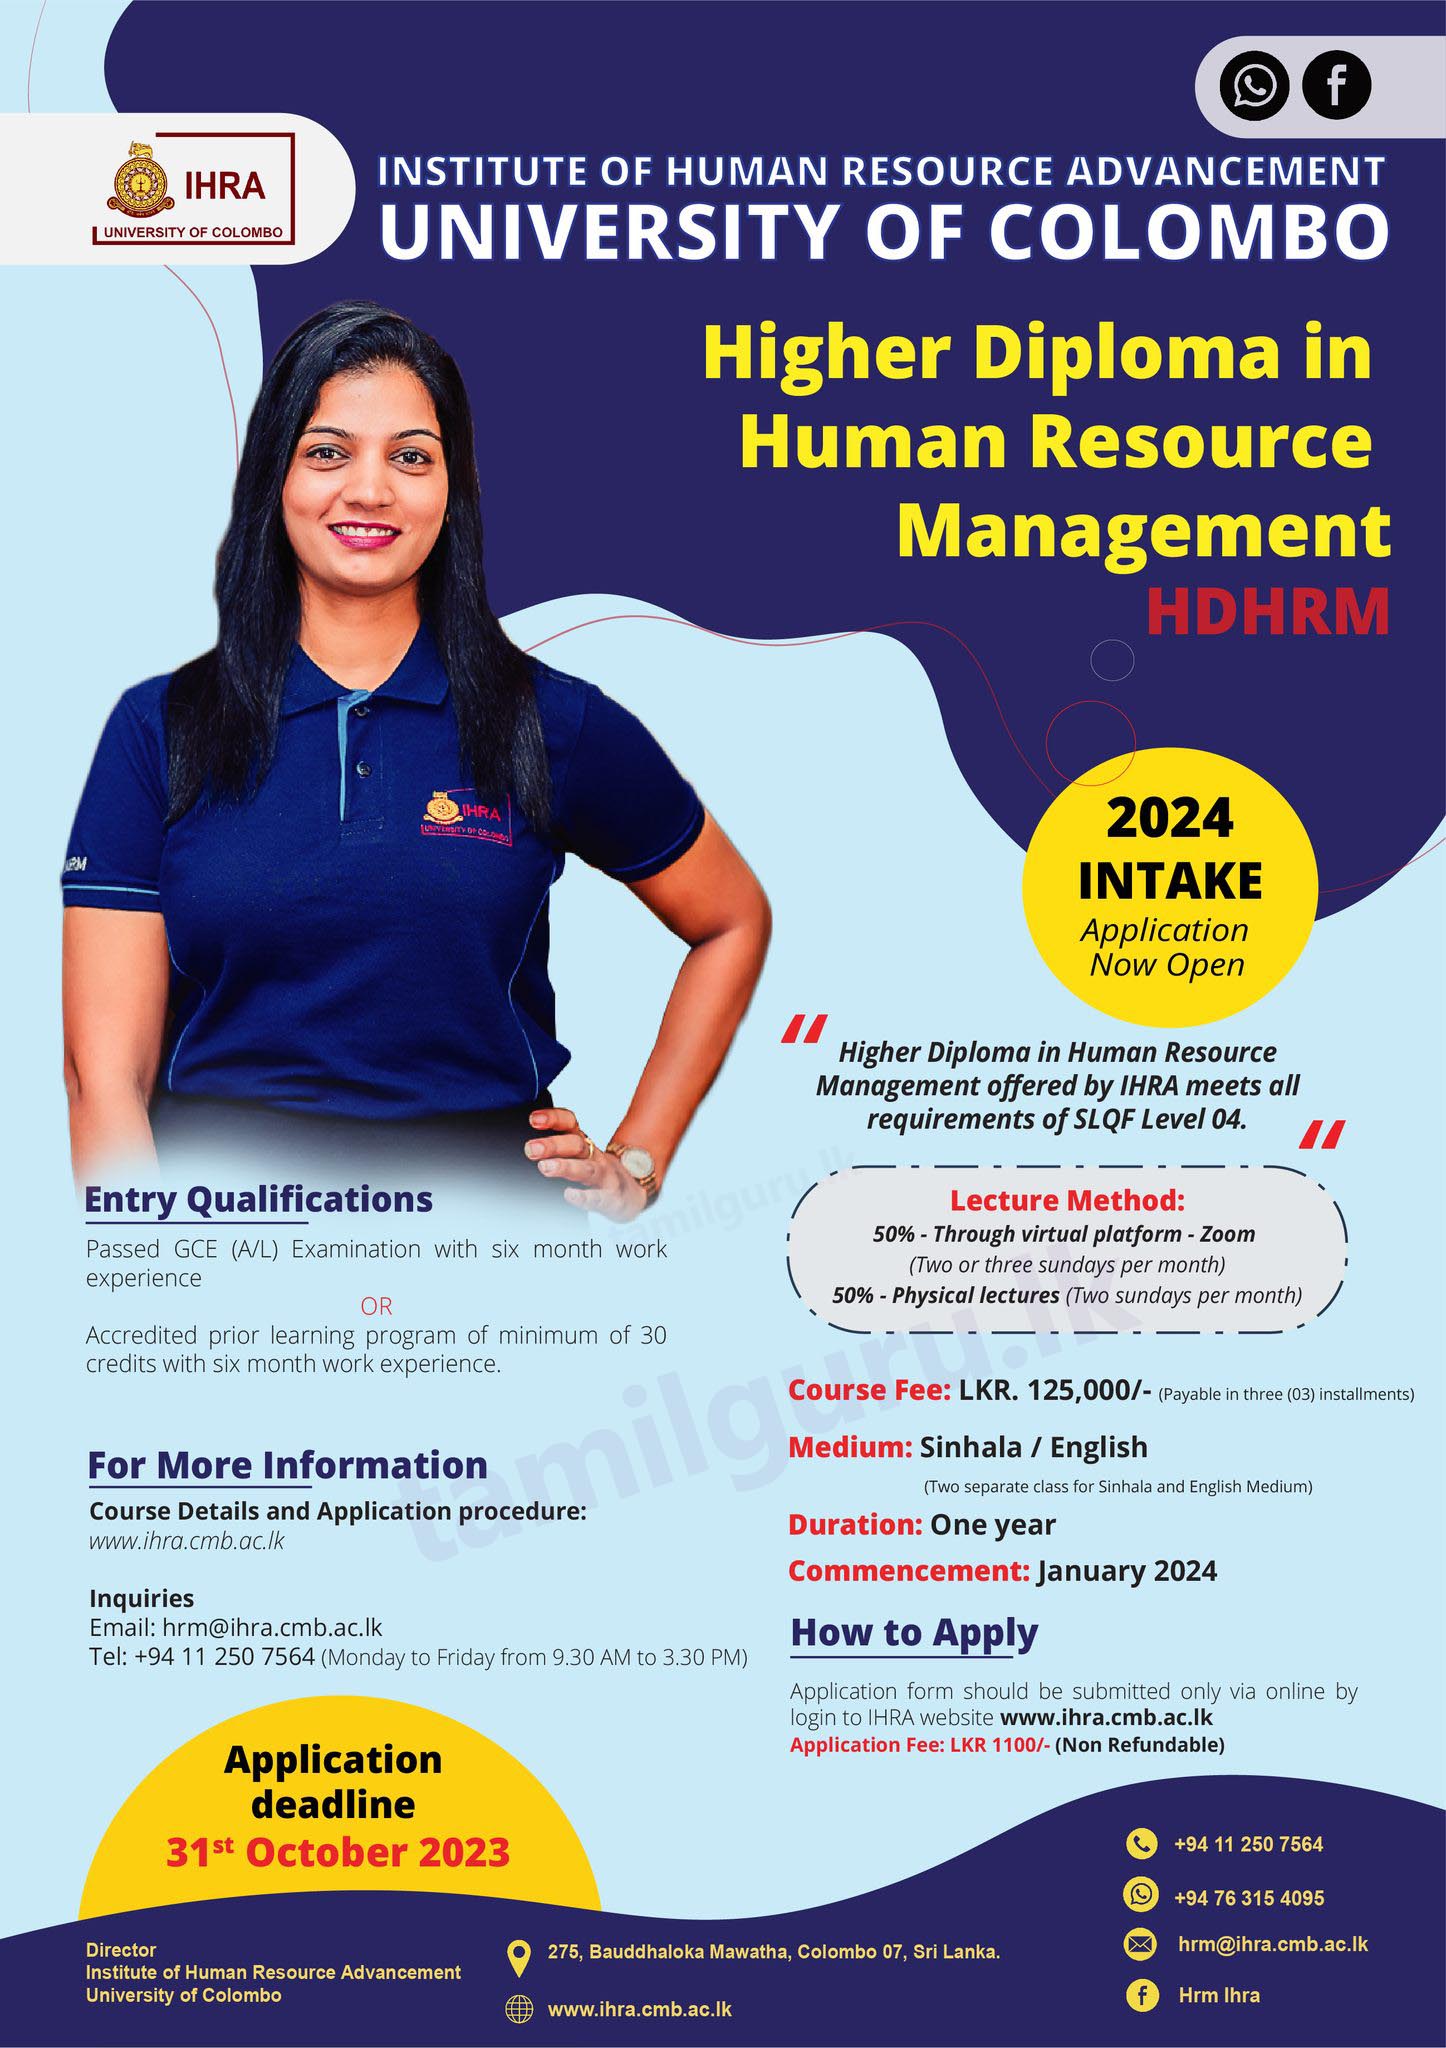 Higher Diploma in Human Resource Management (HRM) 2024 - University of Colombo